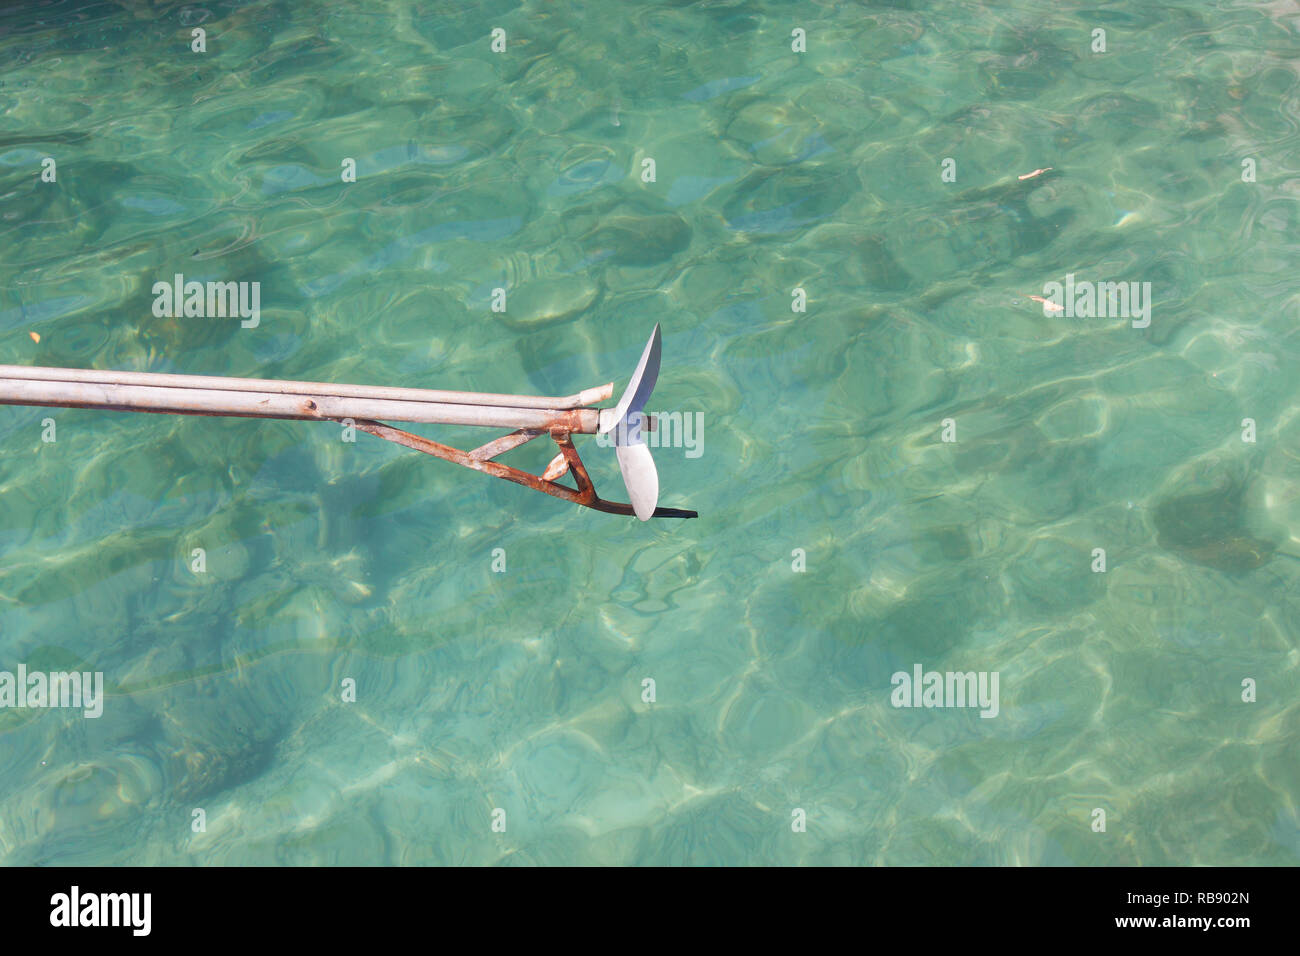 Long tail boat propeller in emerald sea. Stock Photo